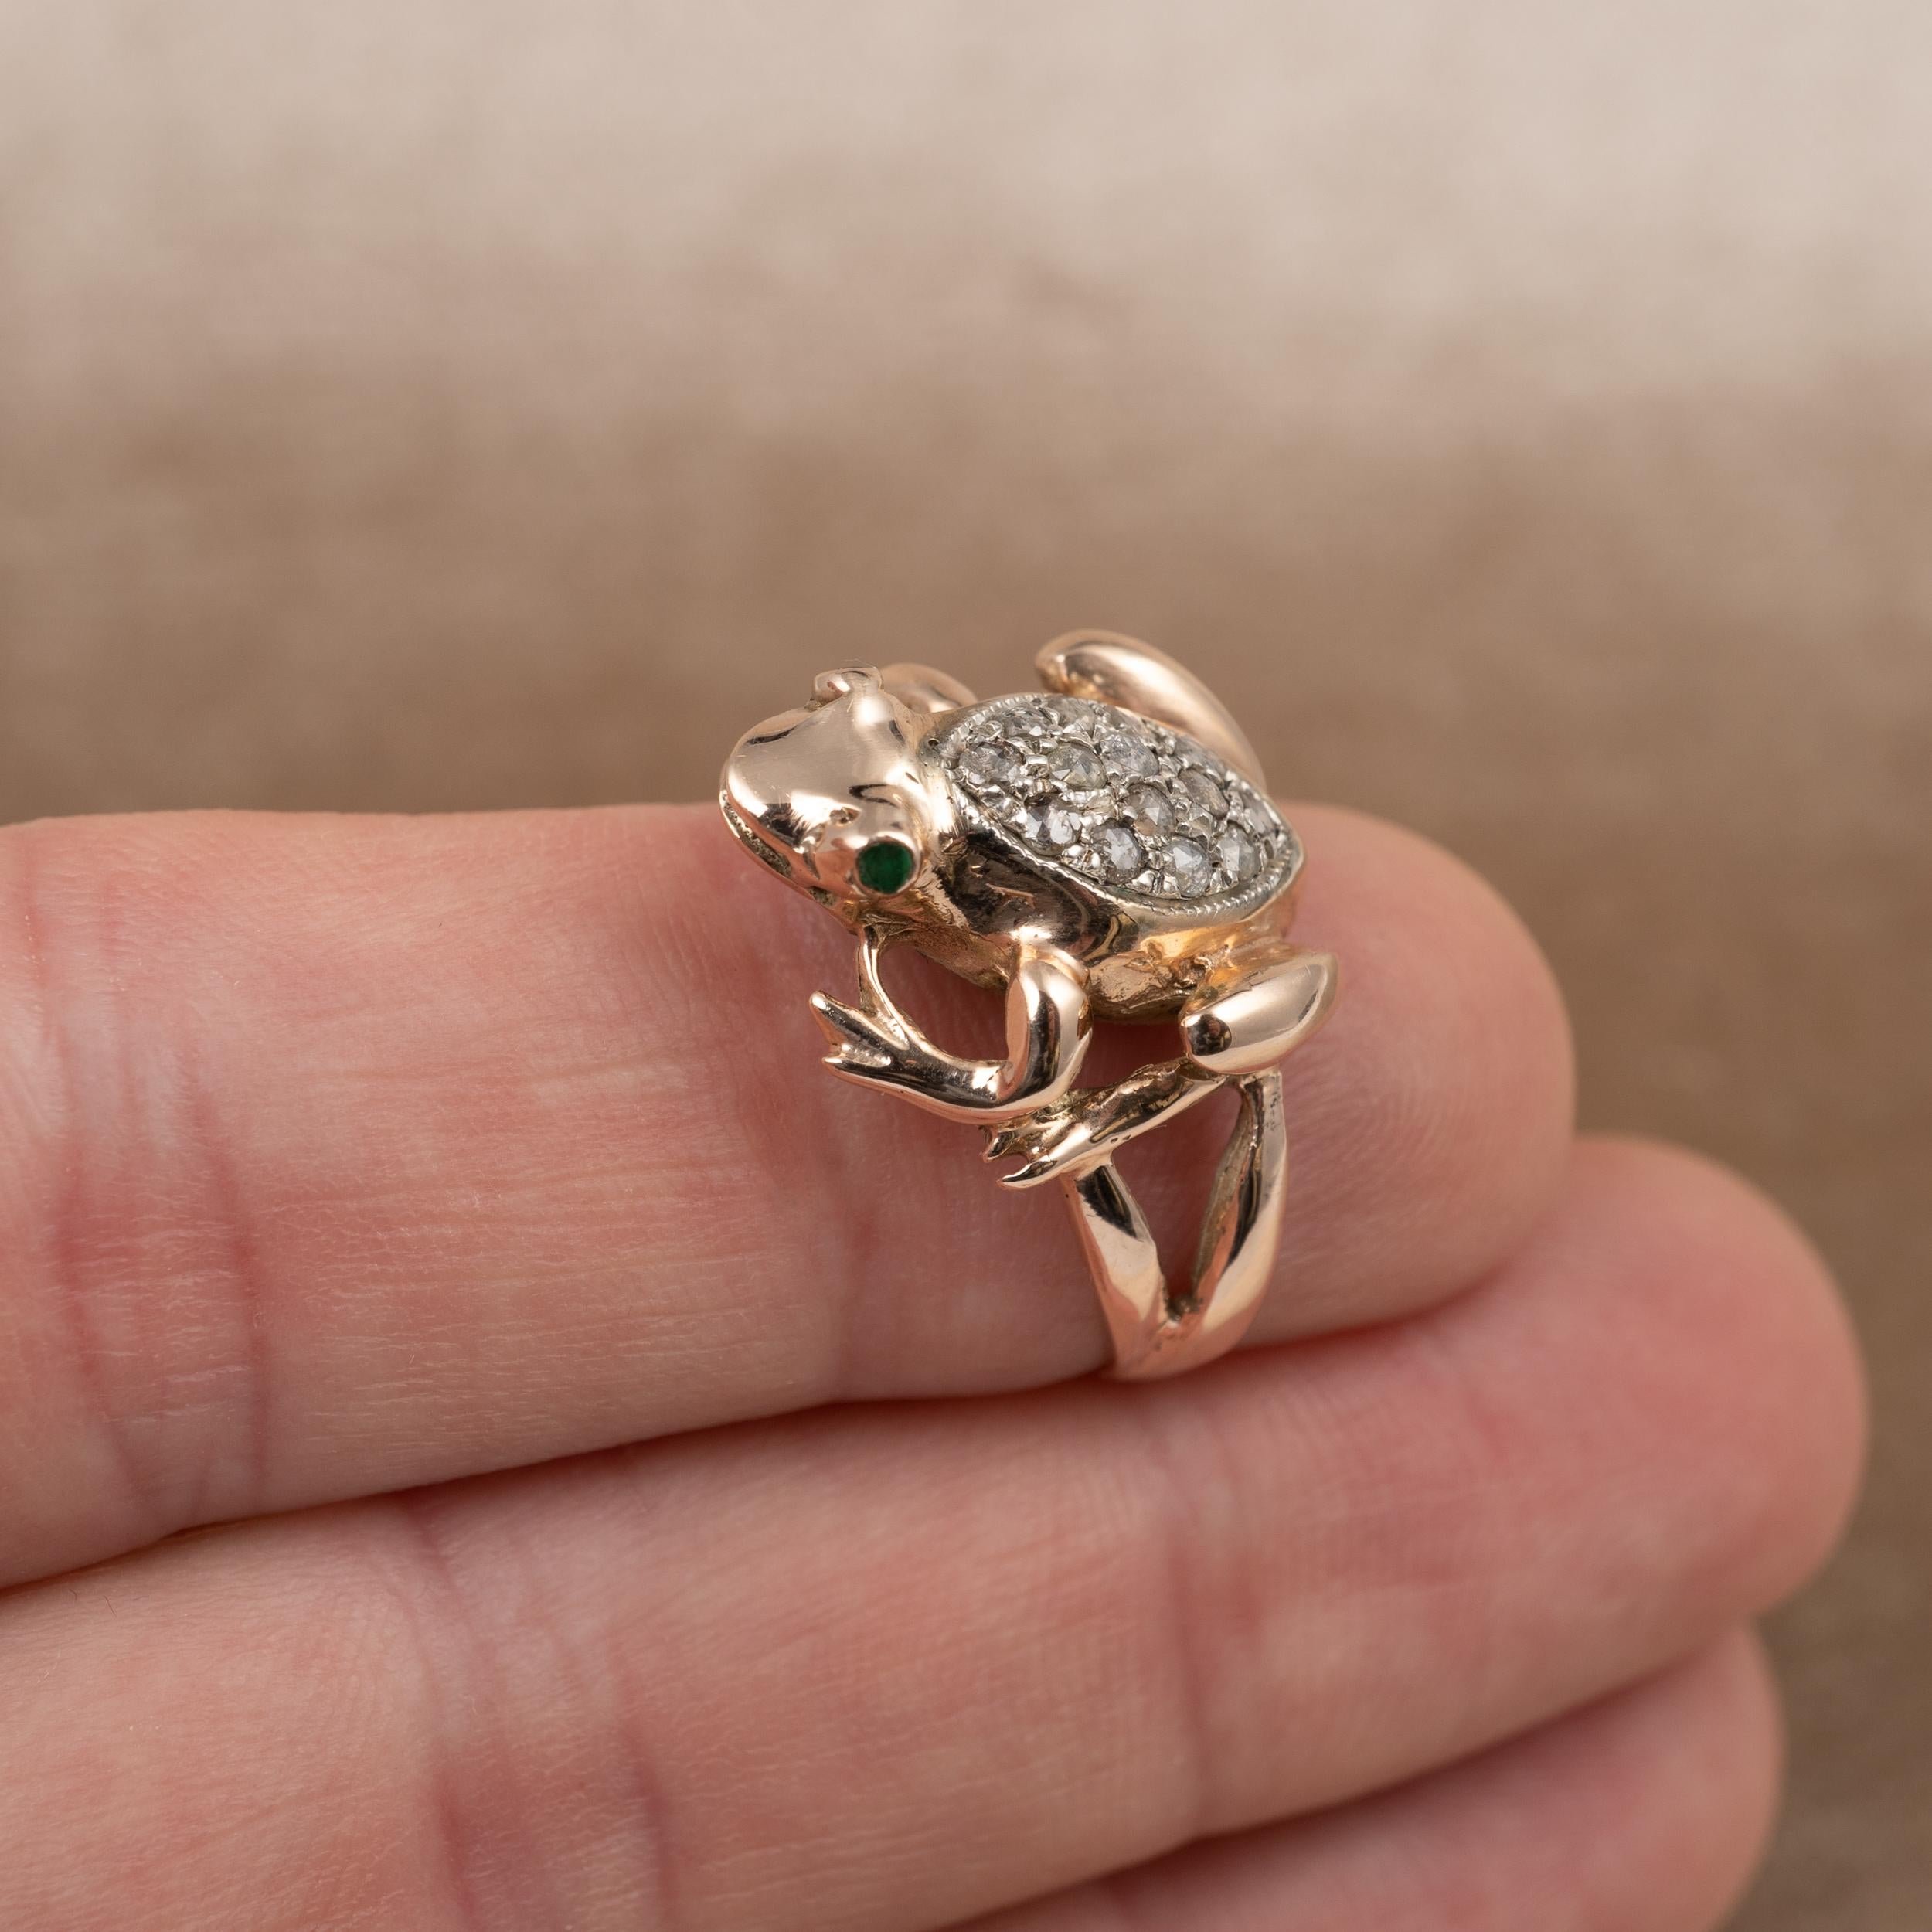 Rose Cut Rose Gold Diamond Emerald Frog Ring Vintage 1970s Fashion Jewelry